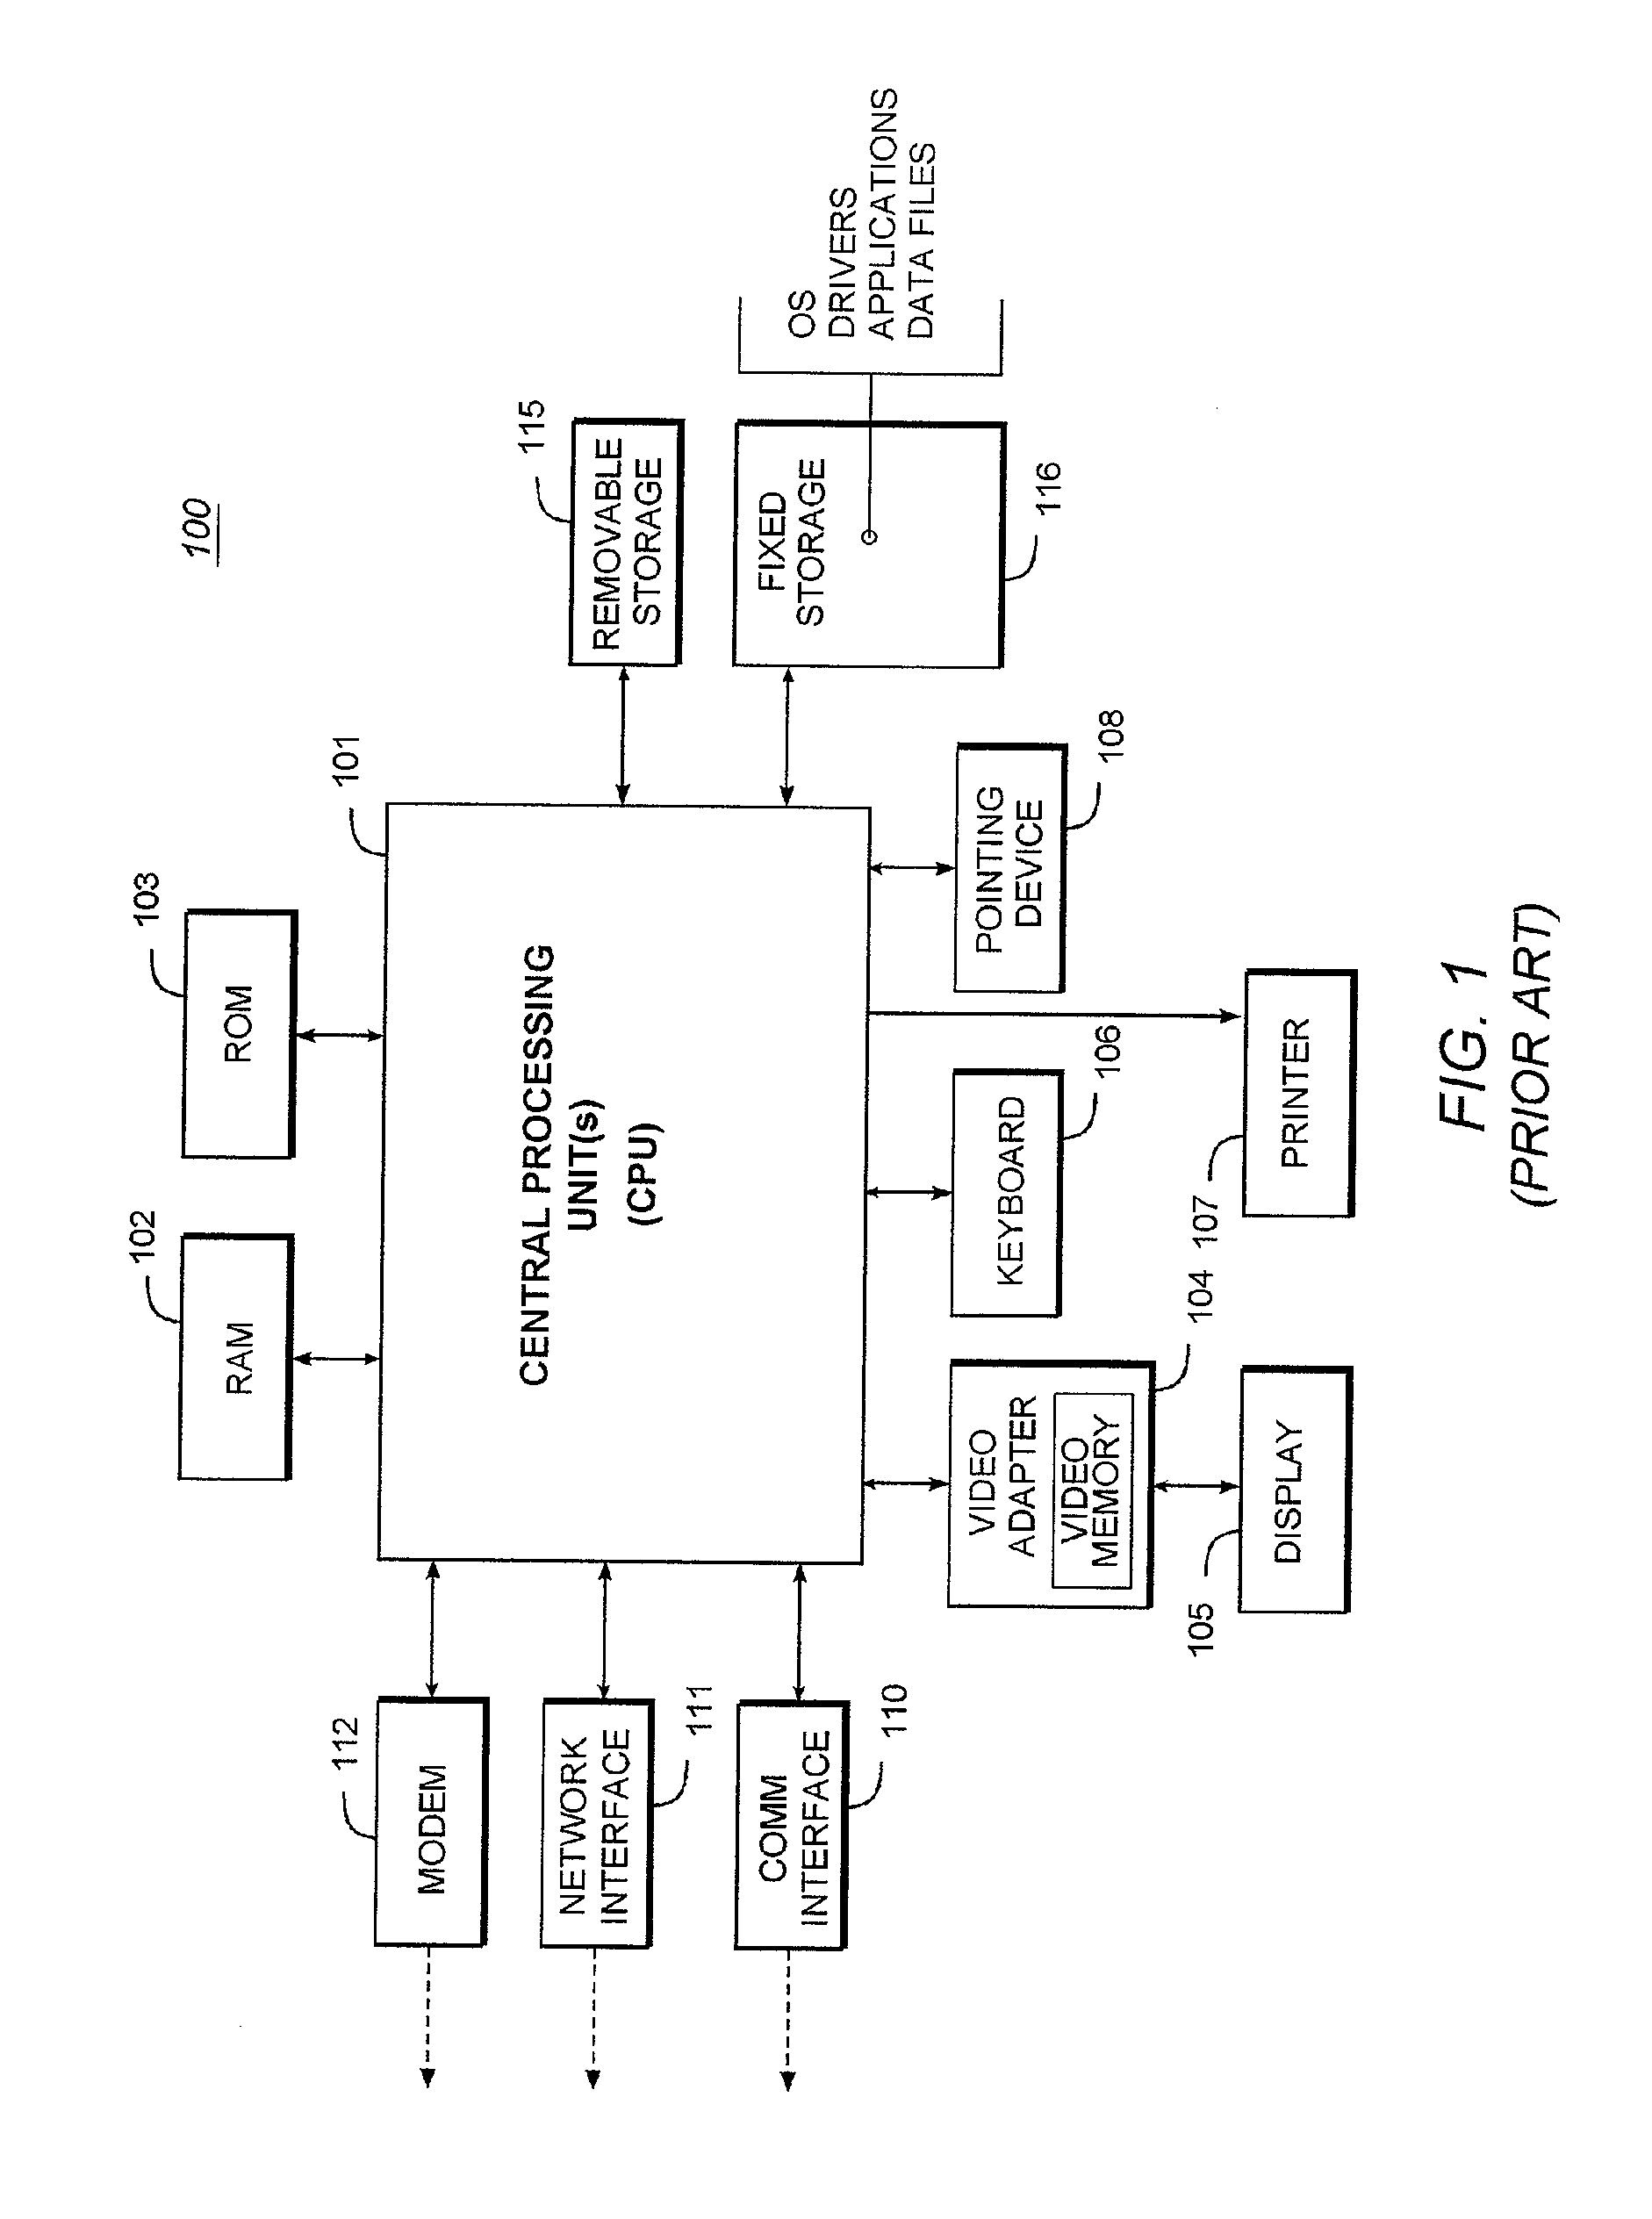 System and Method for Real-Time Content Aggregation and Syndication